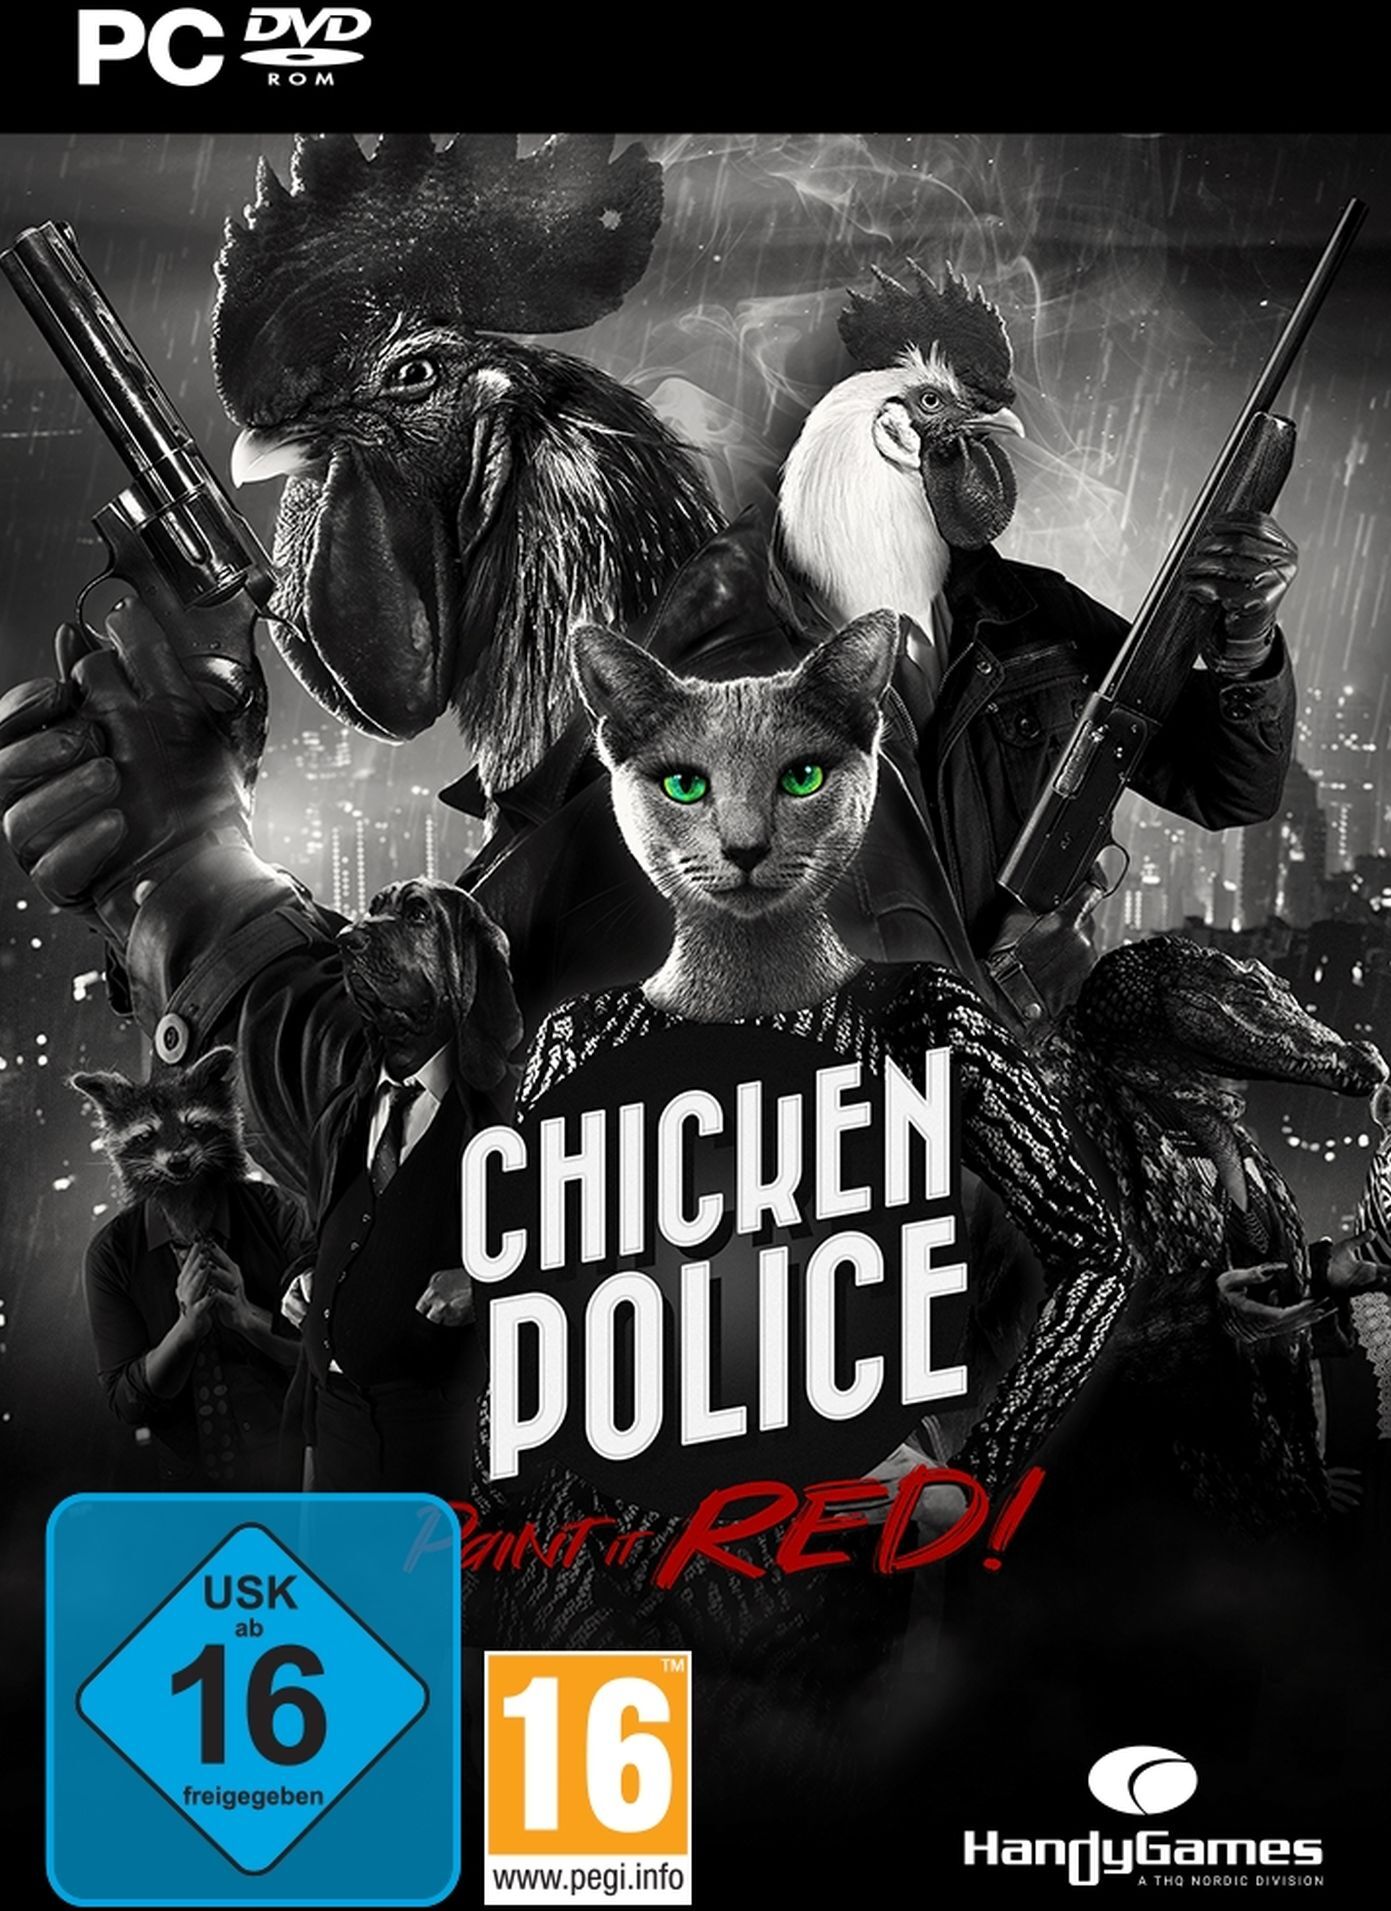 THQ Nordic - Chicken Police: Paint it RED! [DVD] [PC] (D)